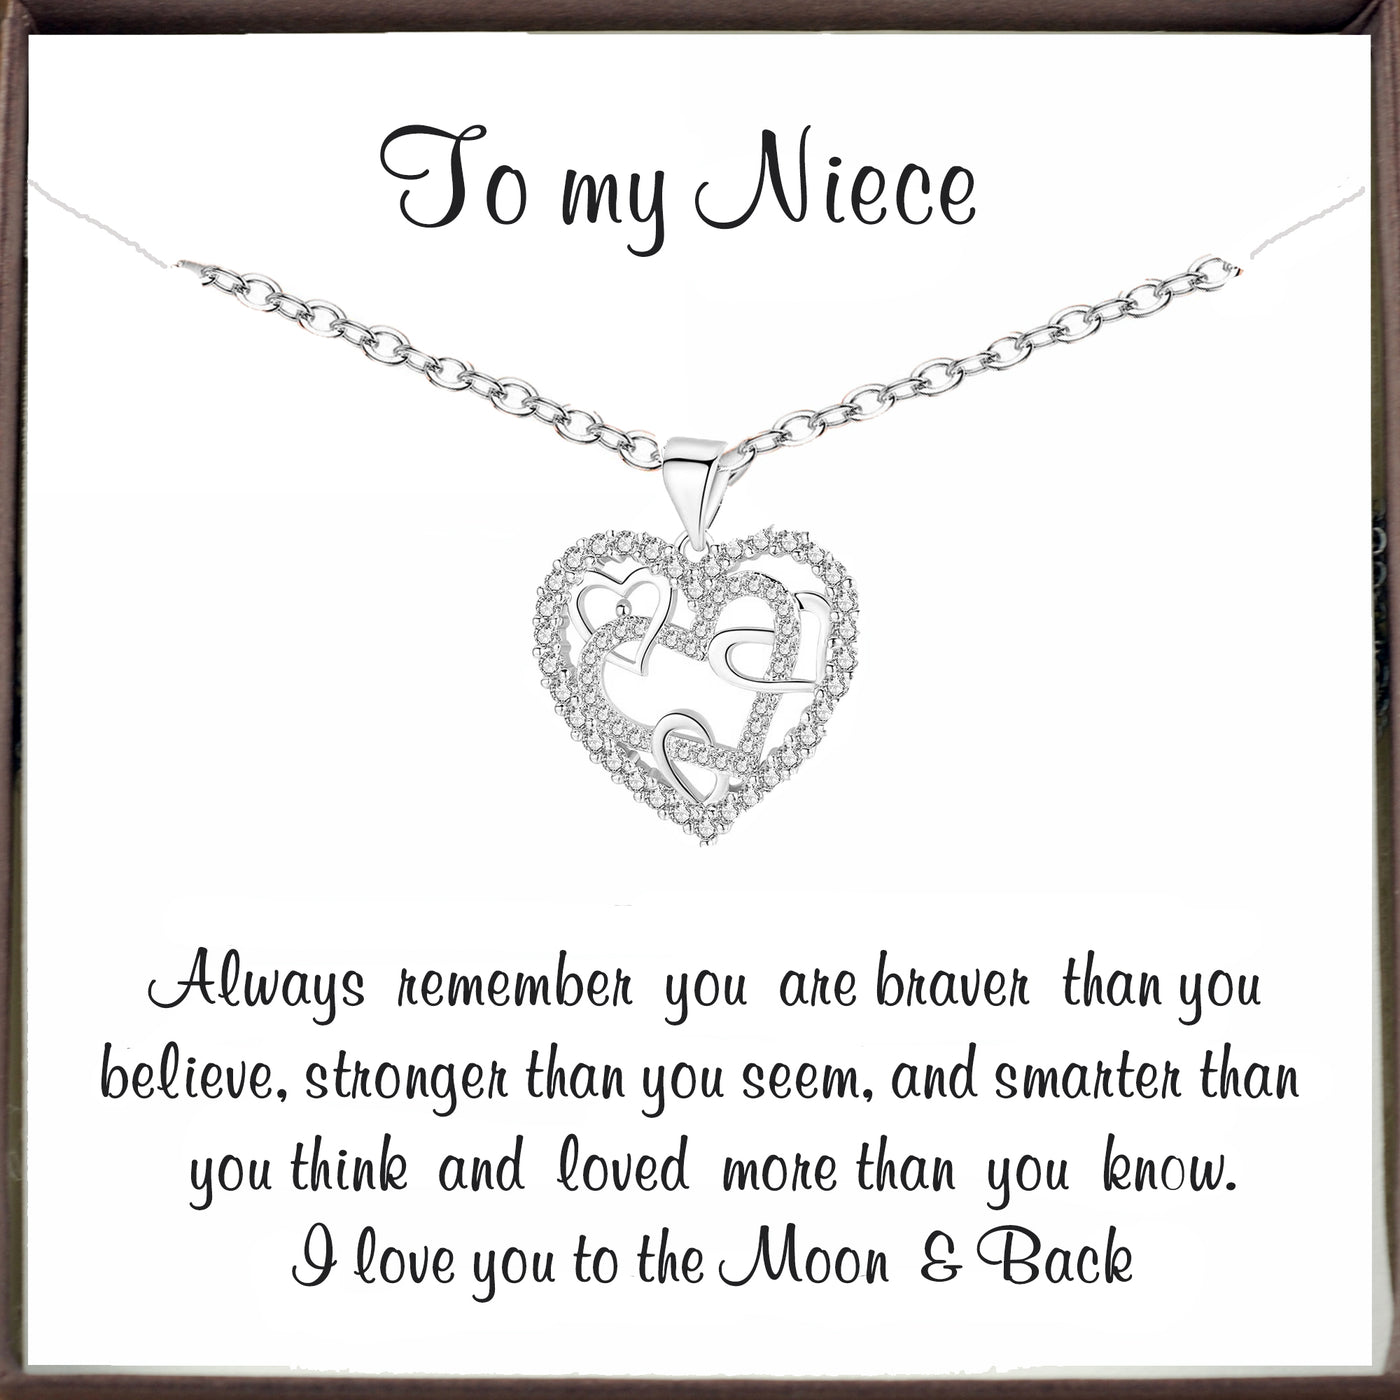 To my Niece - Inspirational Heart Necklace